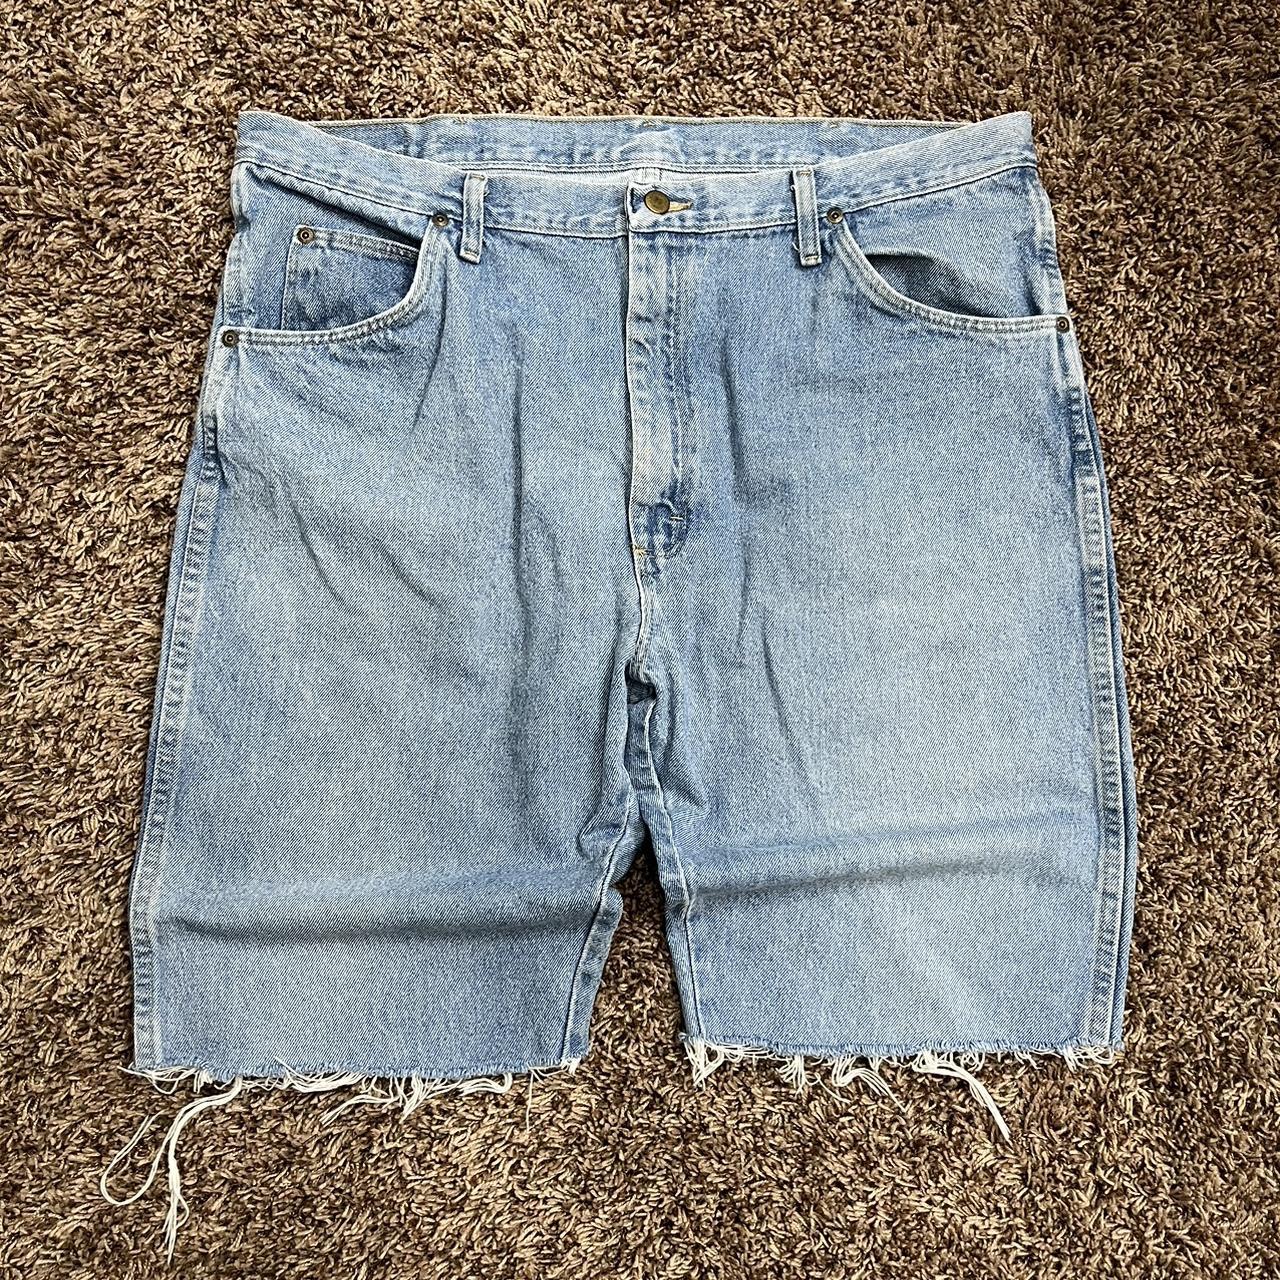 RAWX Men's Denim Shorts, Washed Ripped Distressed Destroyed Cut Off Slim  Fit Jeans Short for Men (Cut Off Rips - Bleach Size 36) - Walmart.com